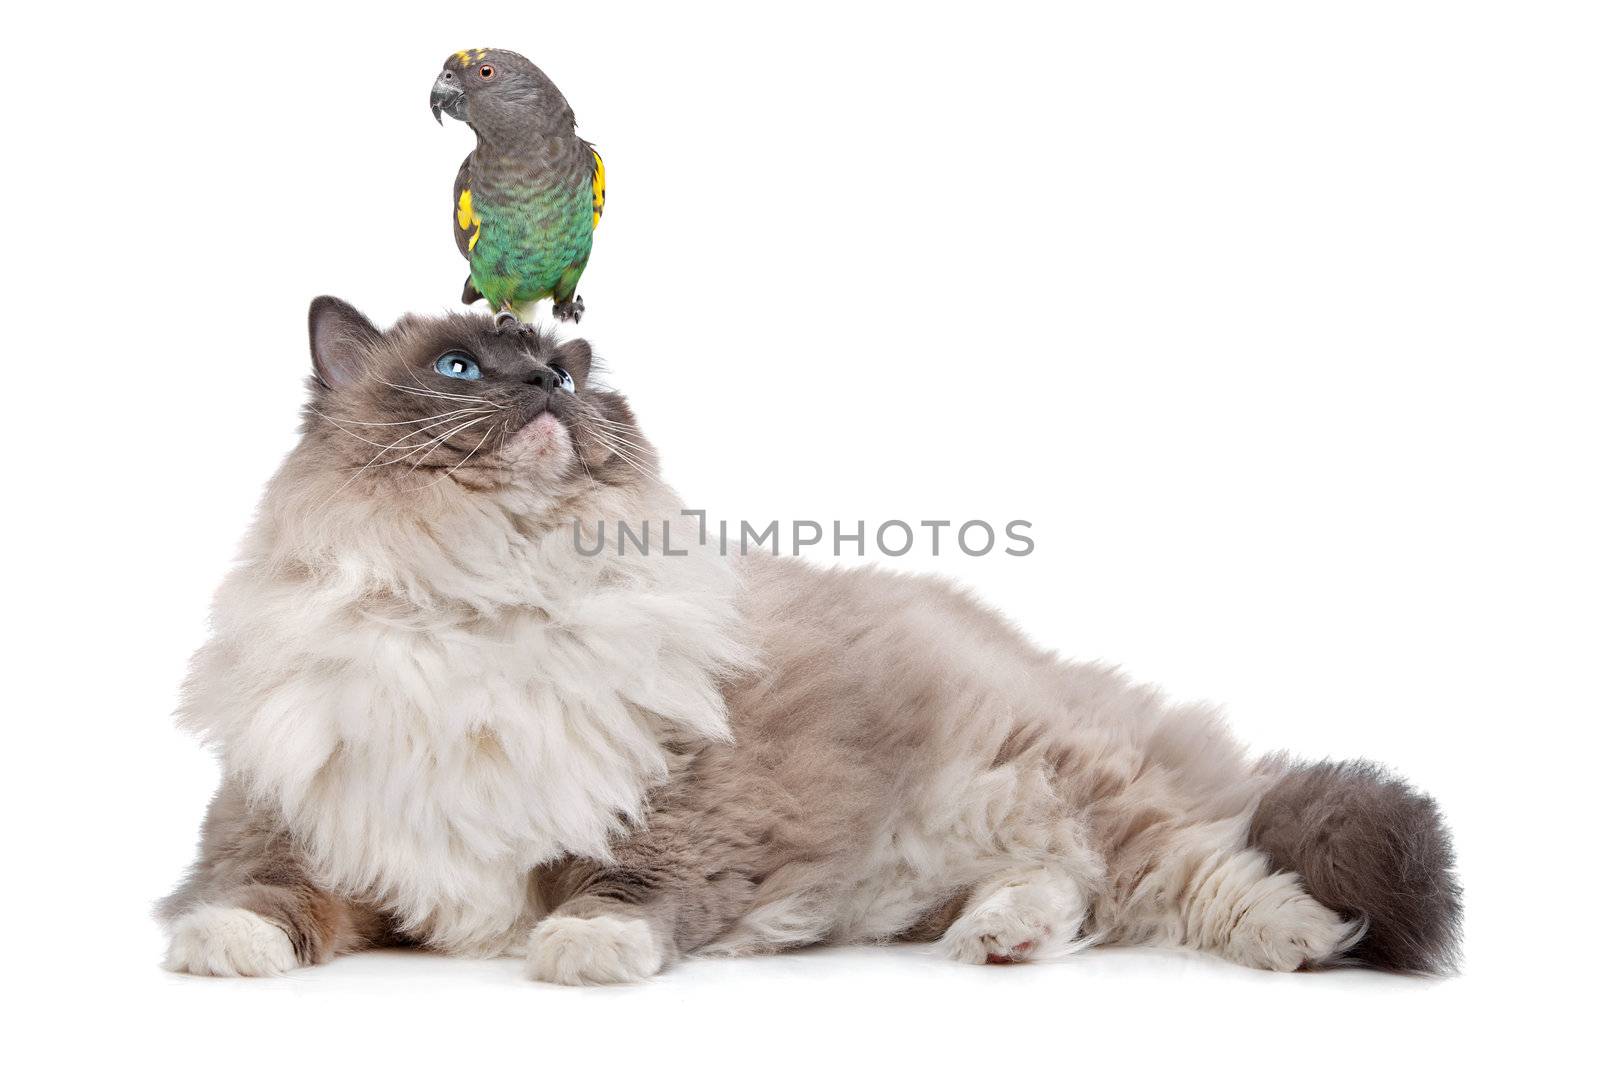 A parrot sitting on a cats head in front of a white background